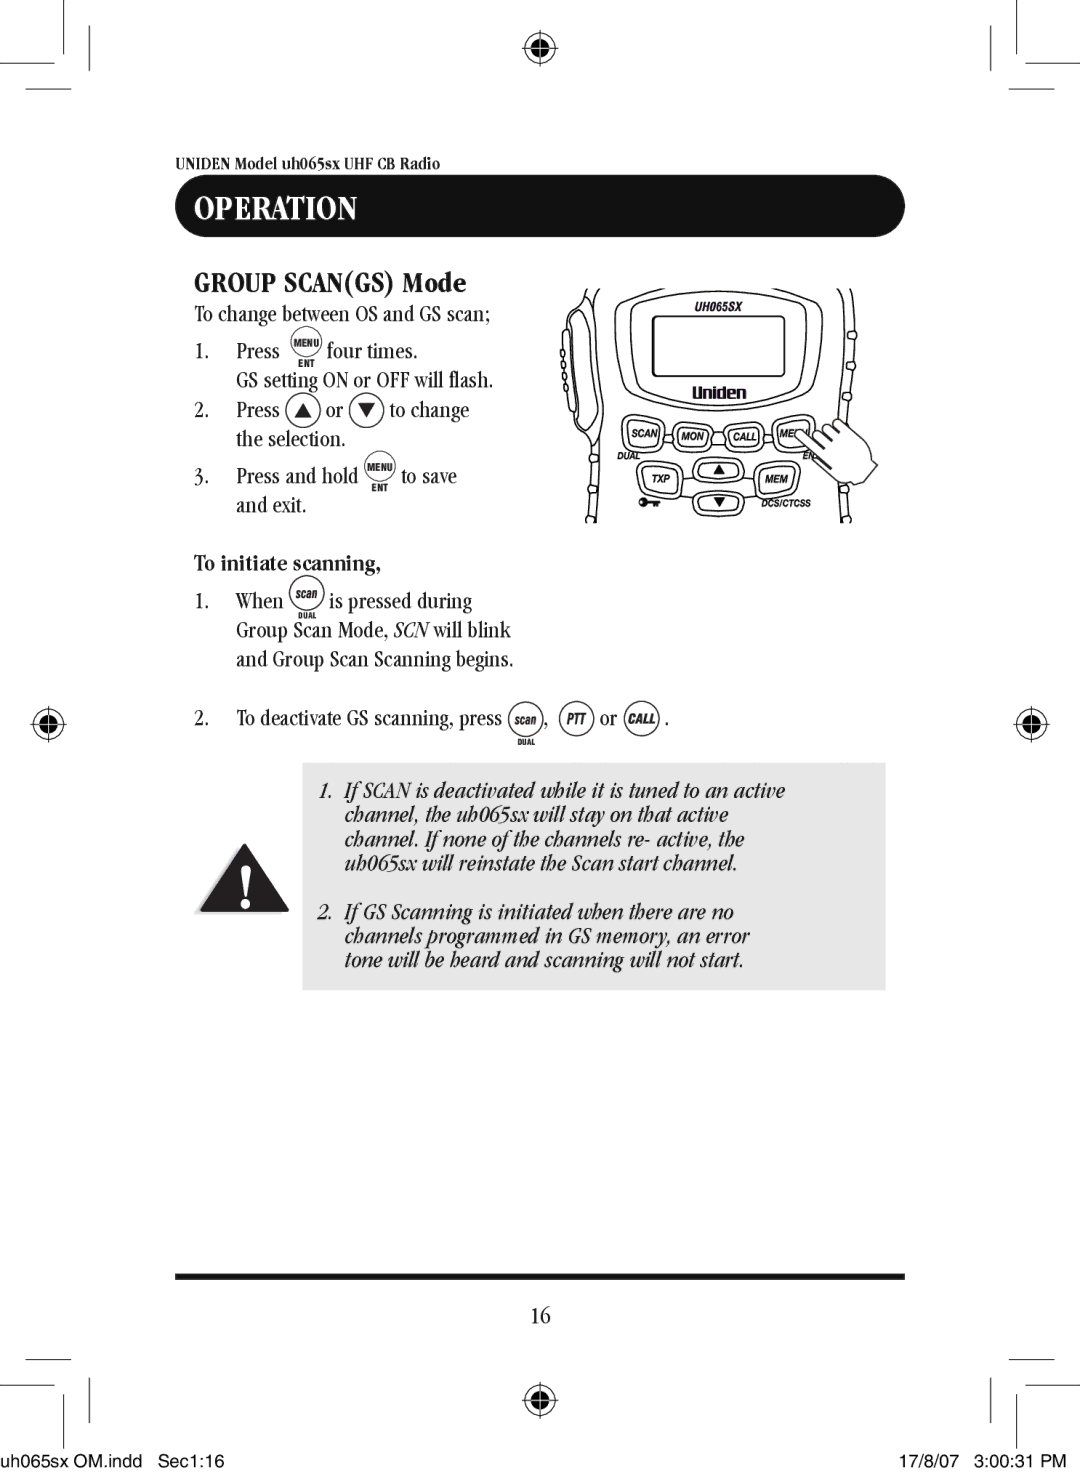 Uniden uh065sx-2 owner manual To initiate scanning, When is pressed during 